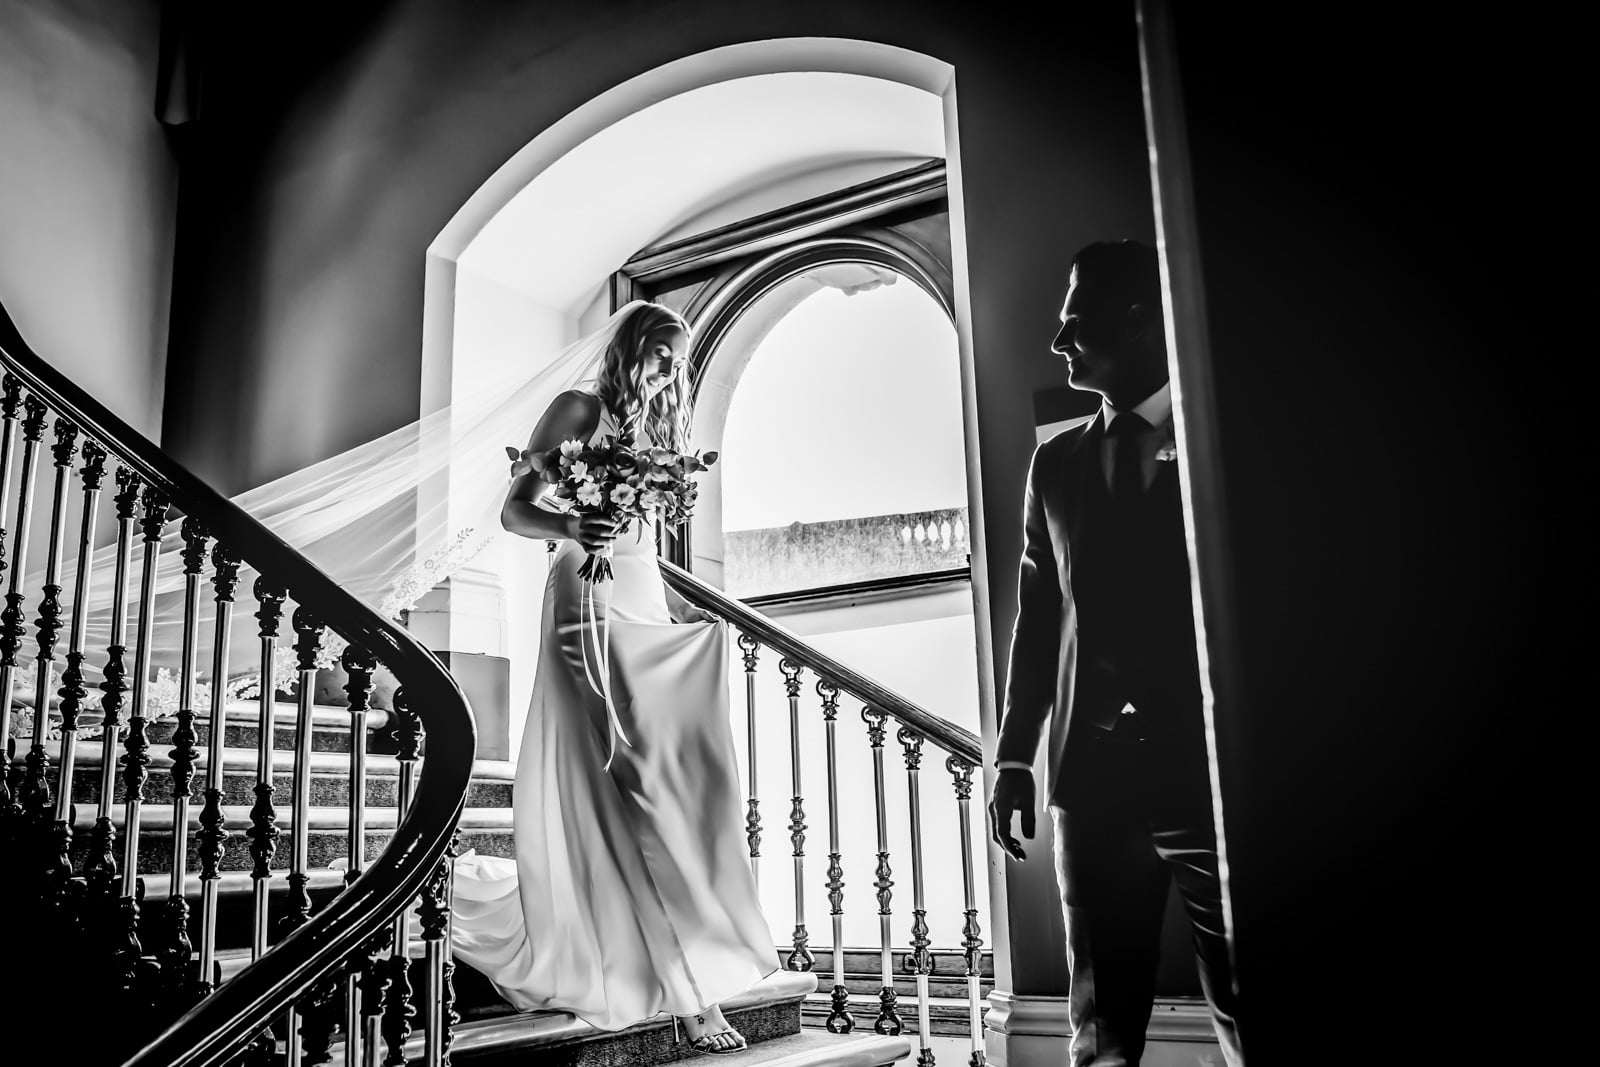 The bride walks down the stairs before the ceremony